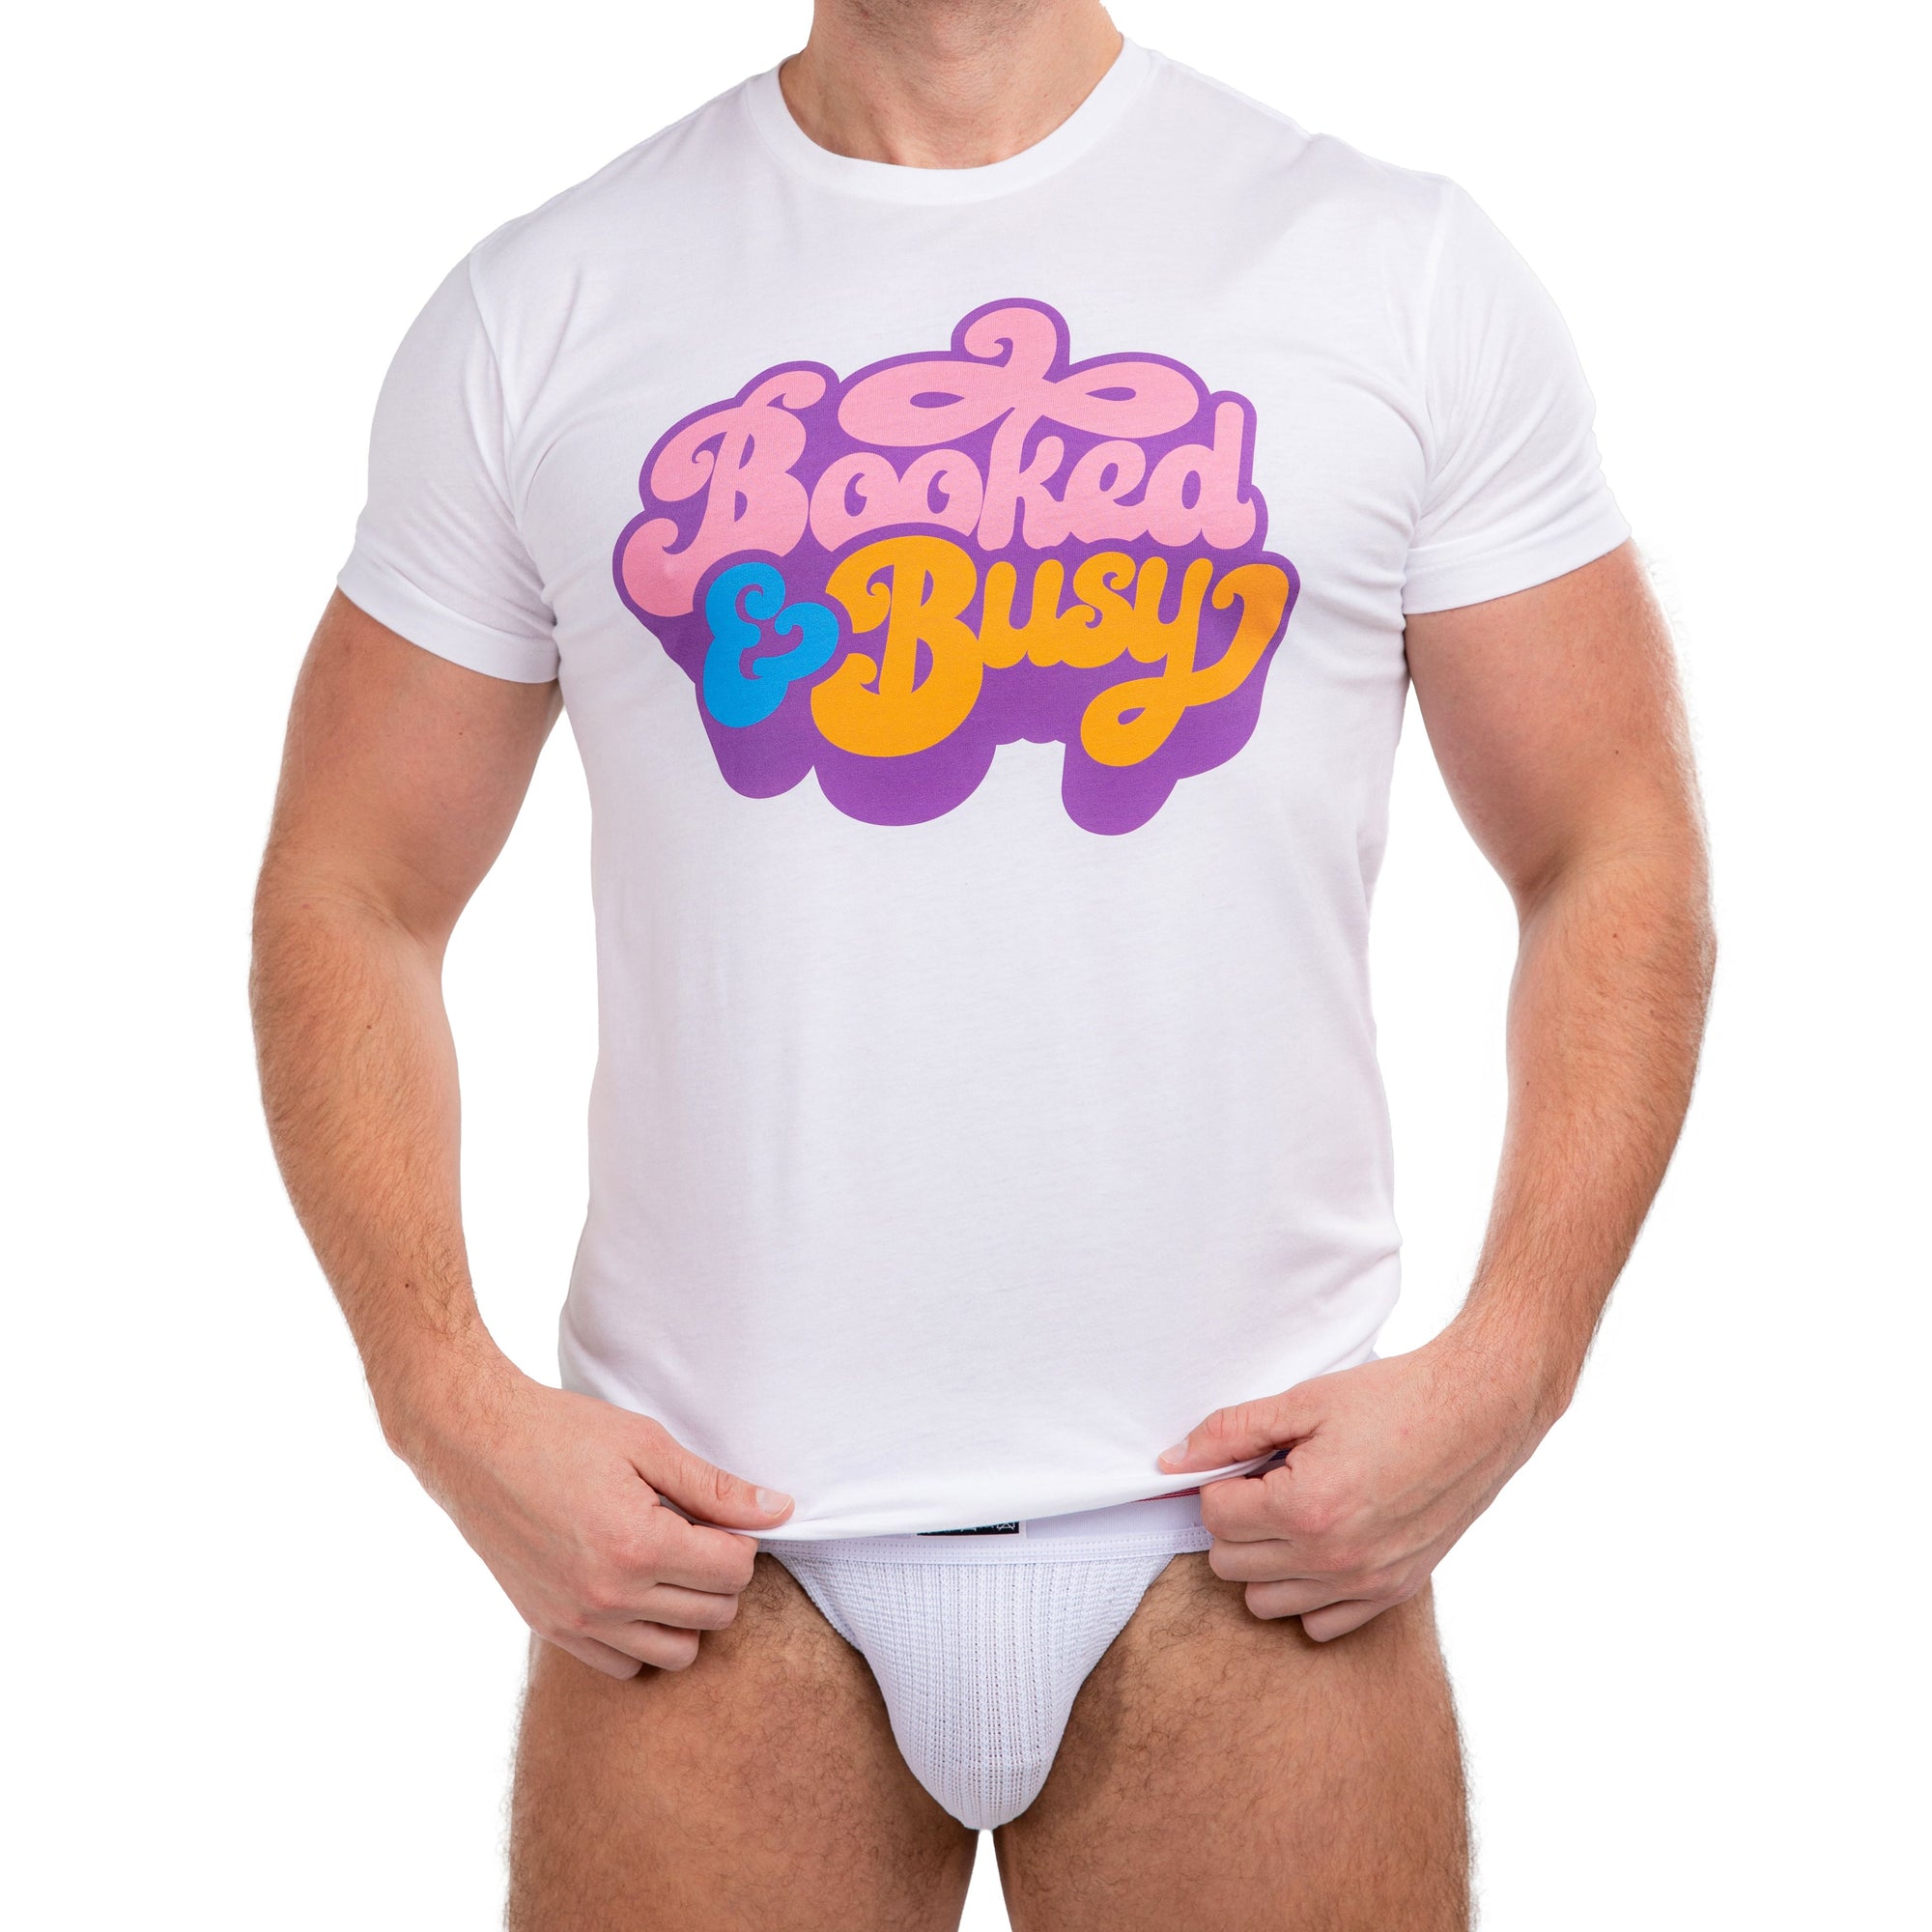 Booked and Busy Shirt - THK/ThirstyMale.com